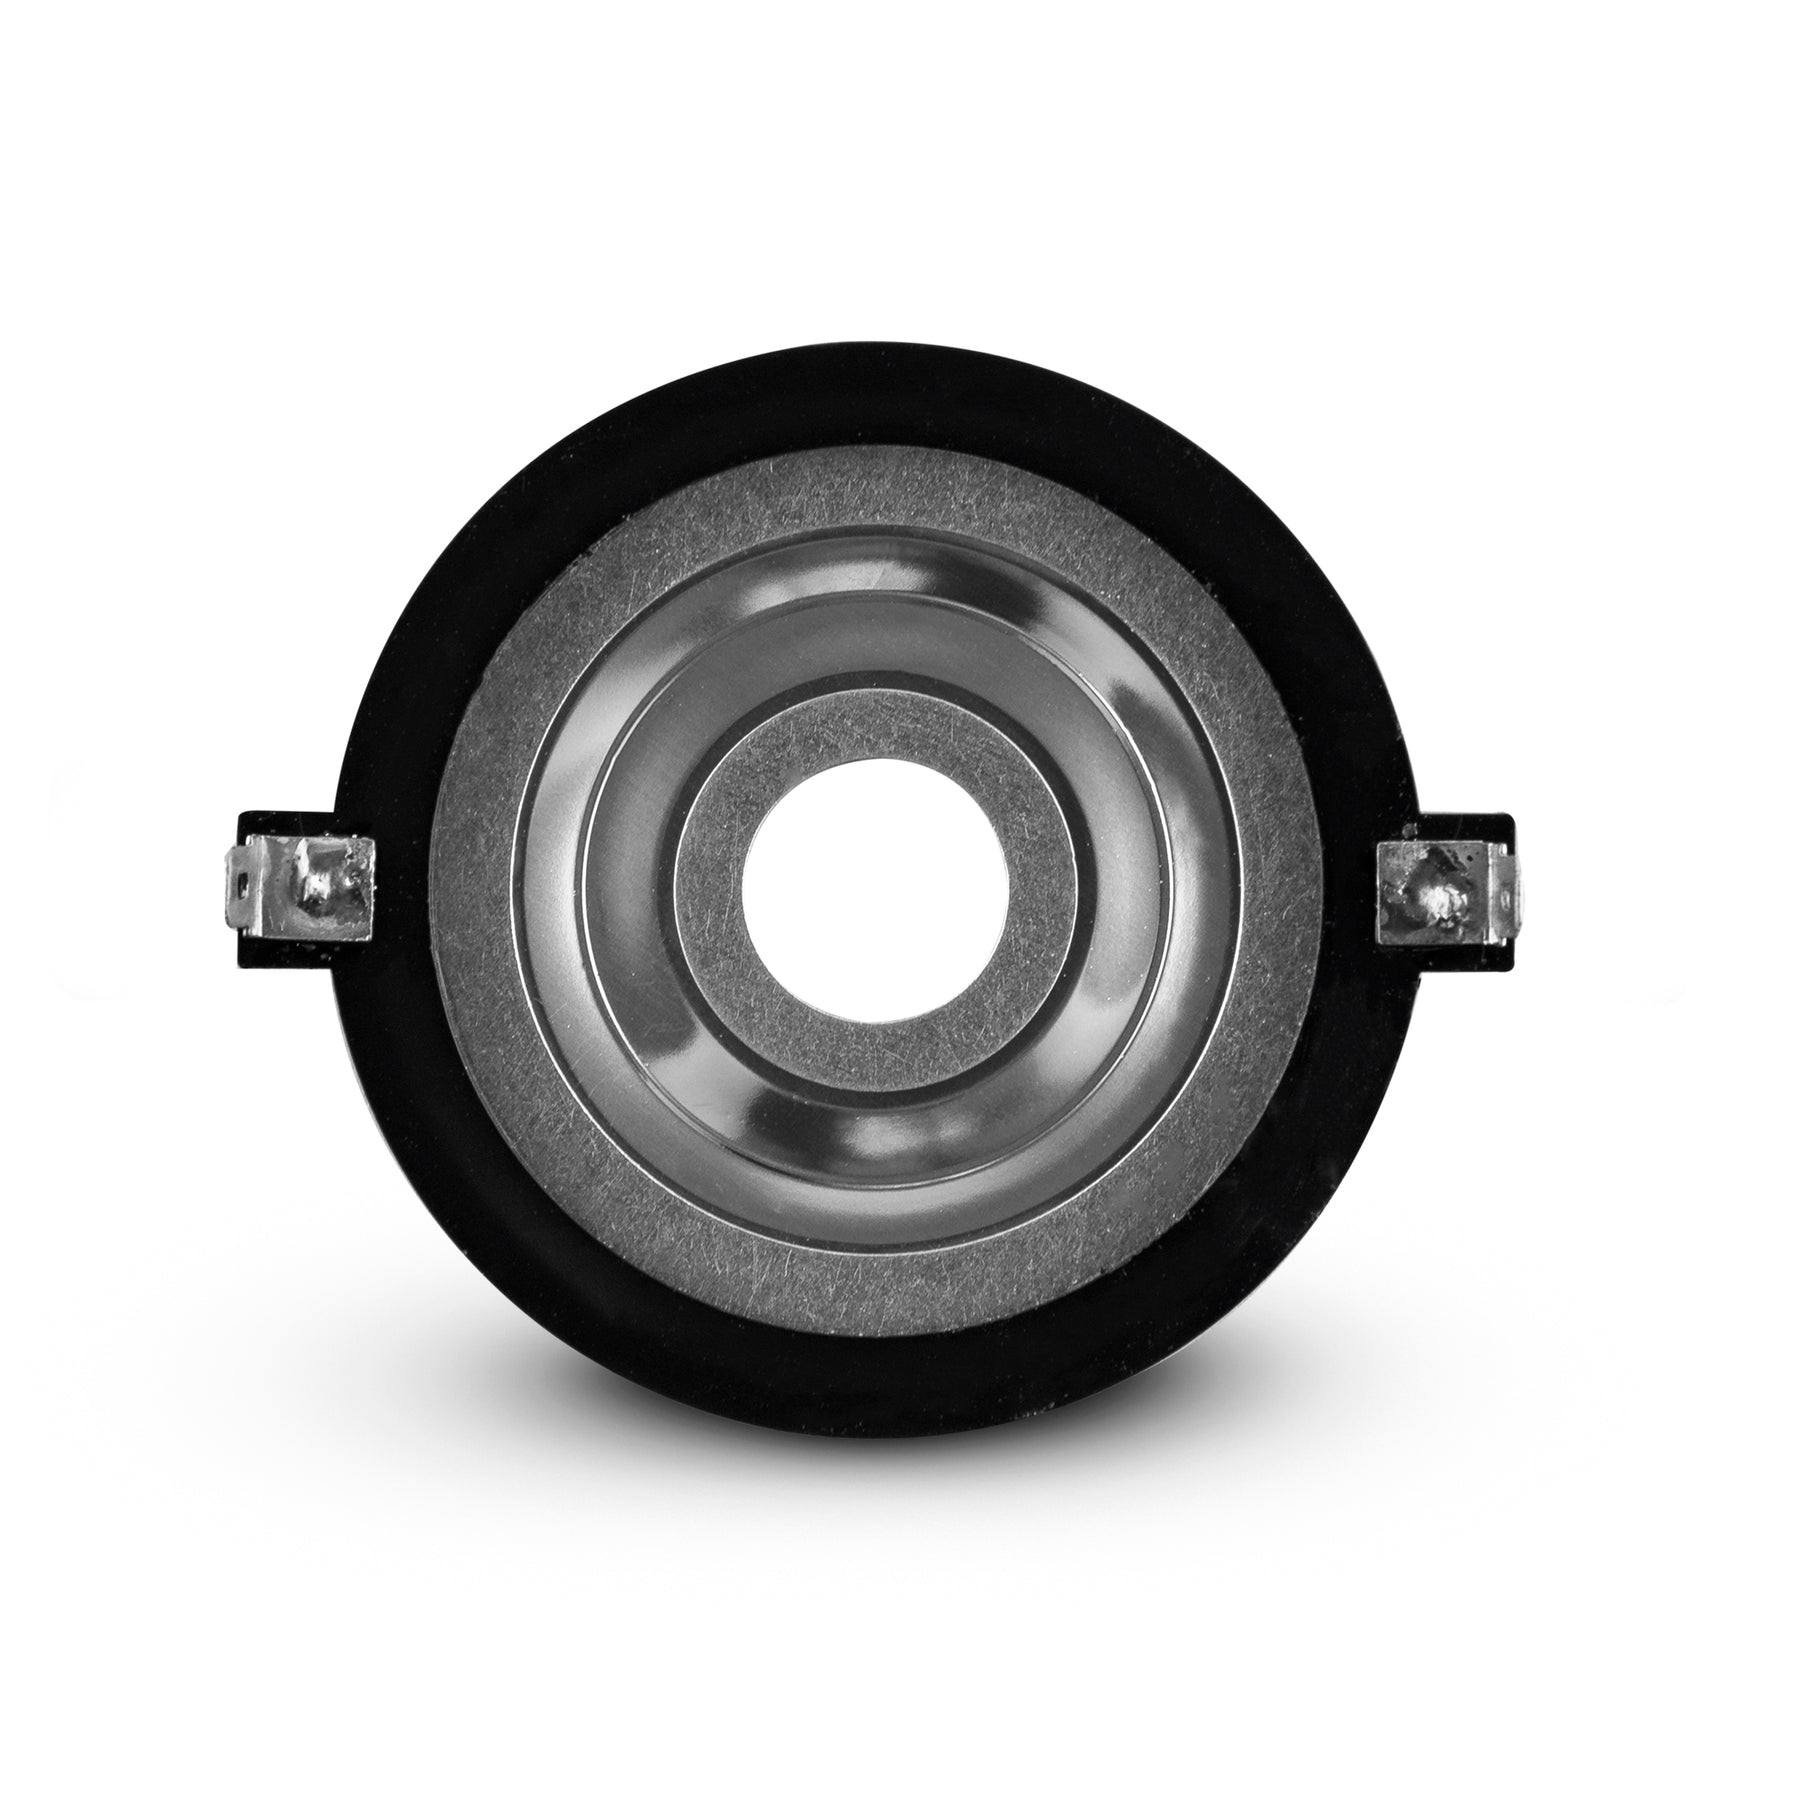 PRO Replacement Diaphragm For PRO-TW320 And Universal 1.5" VCL 8OHM